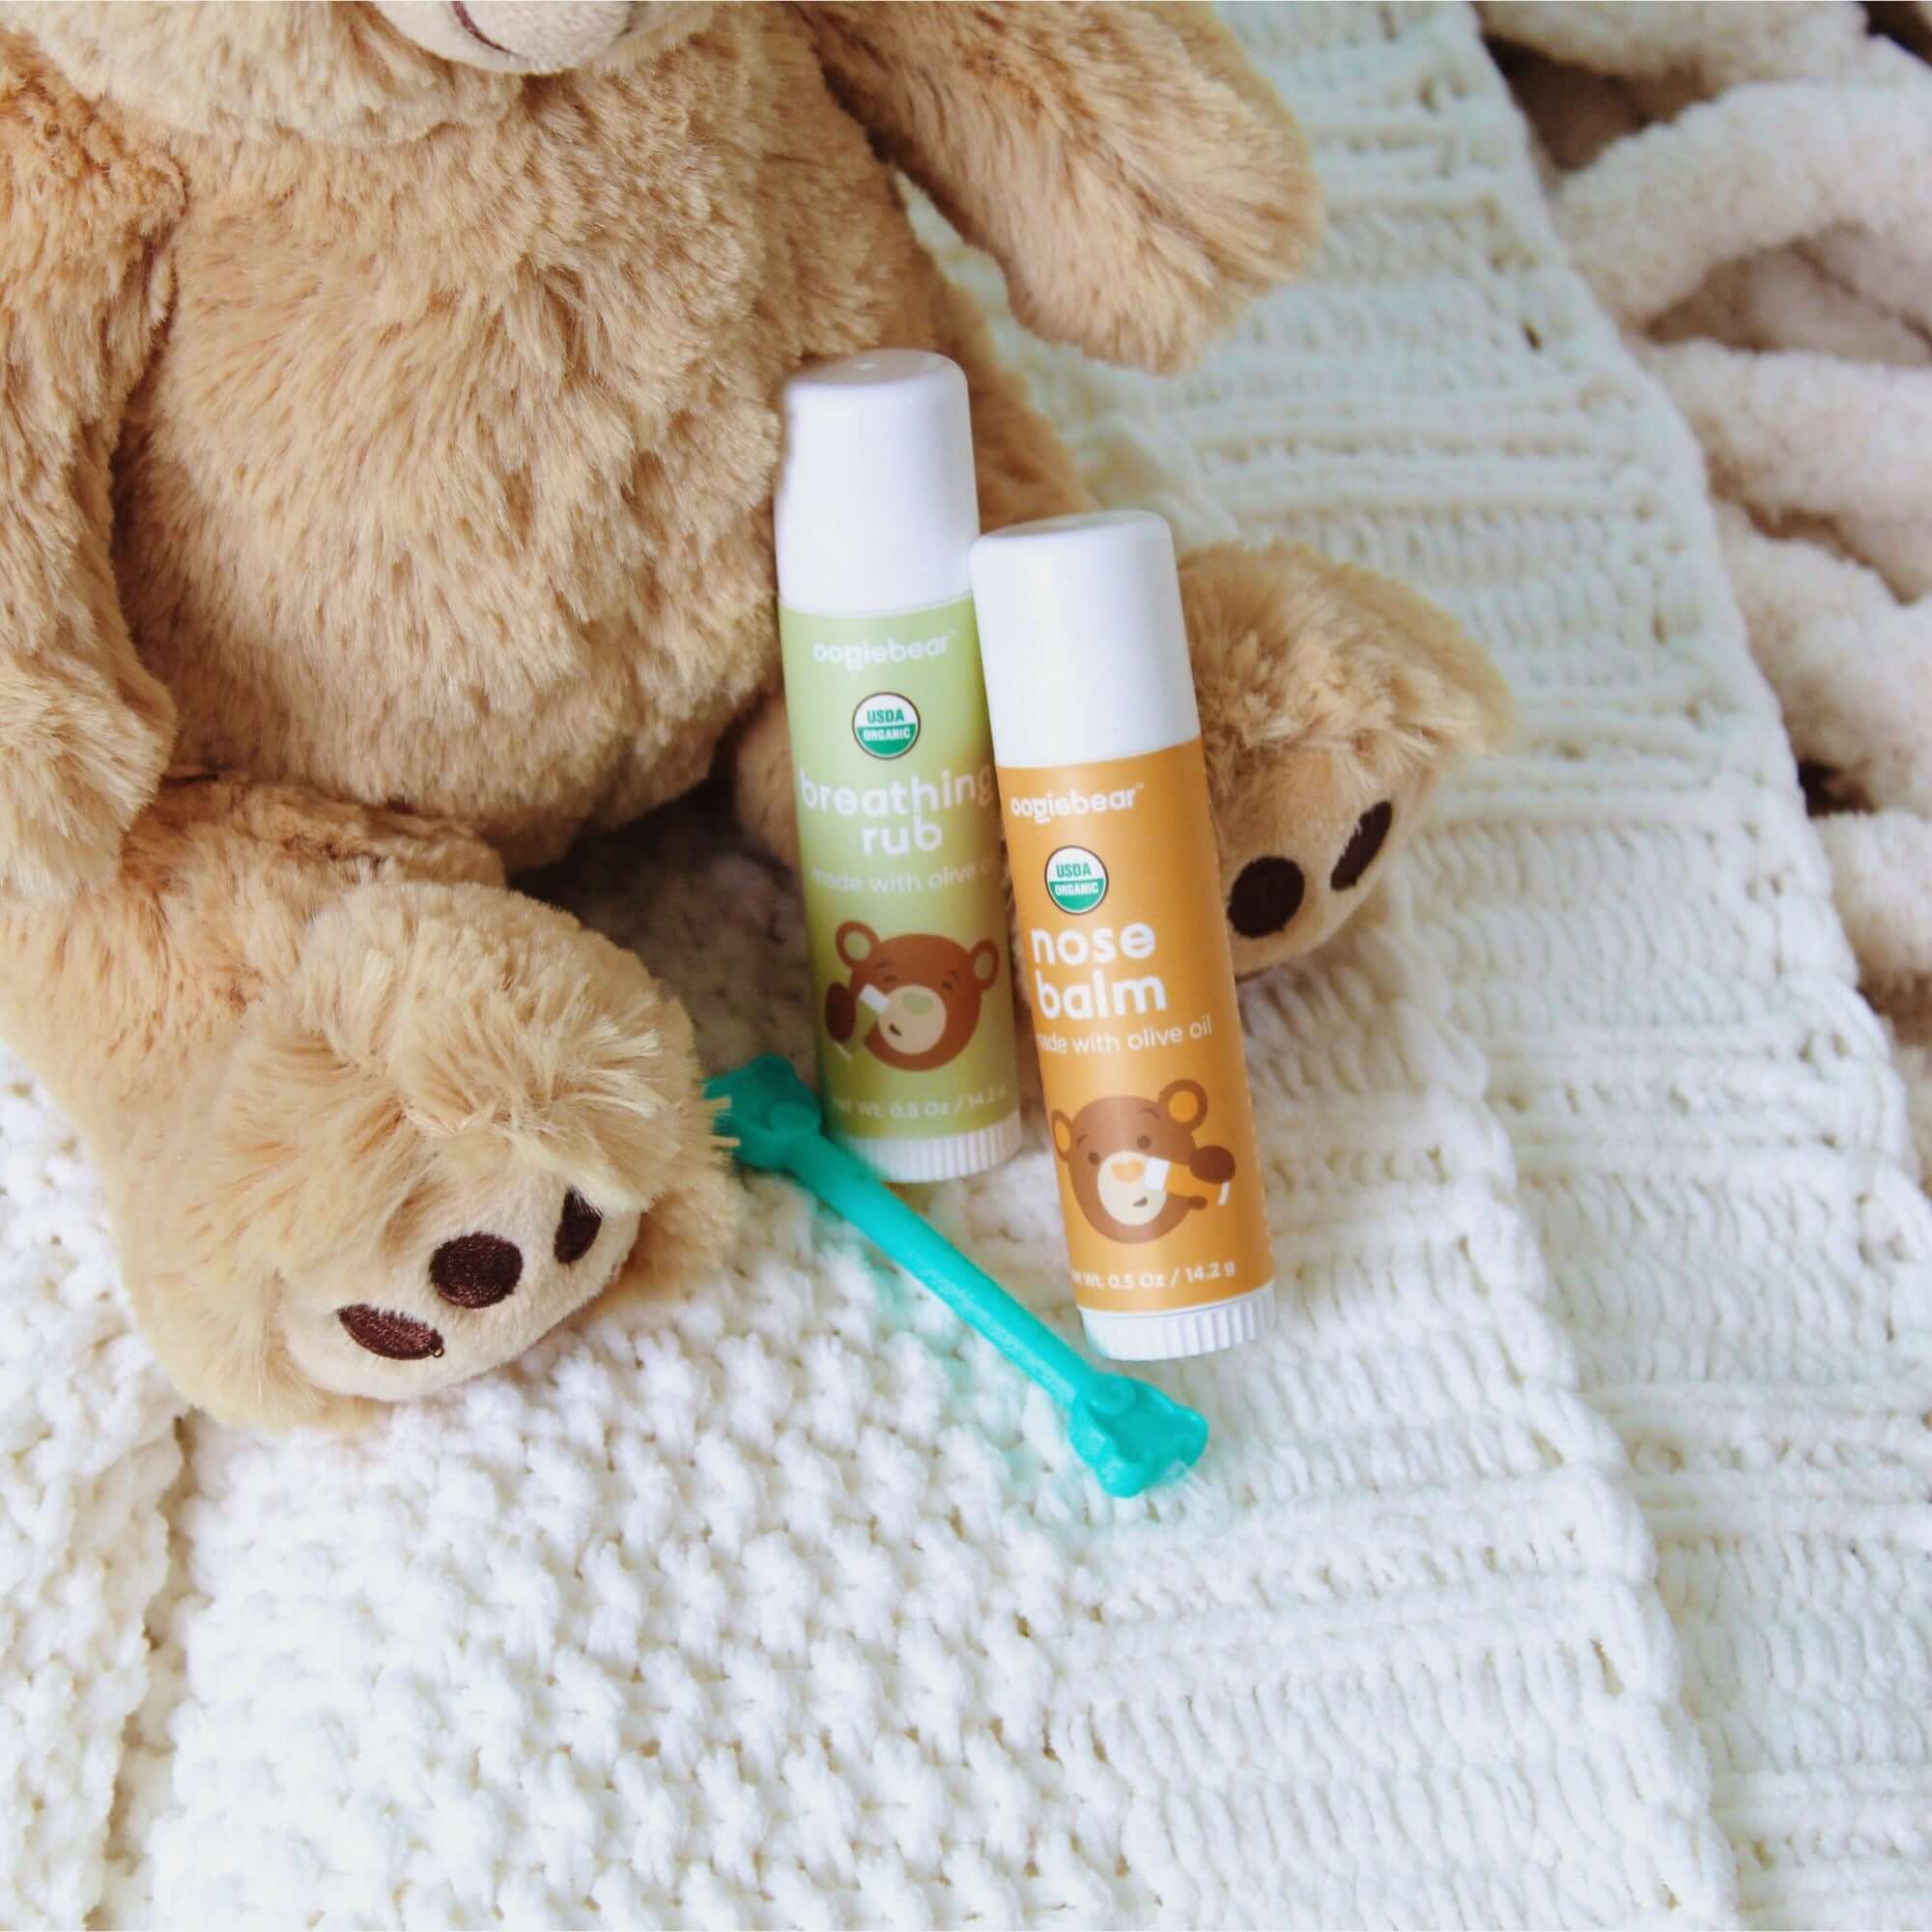 oogiebear breathing trio for babies with colds or congestions